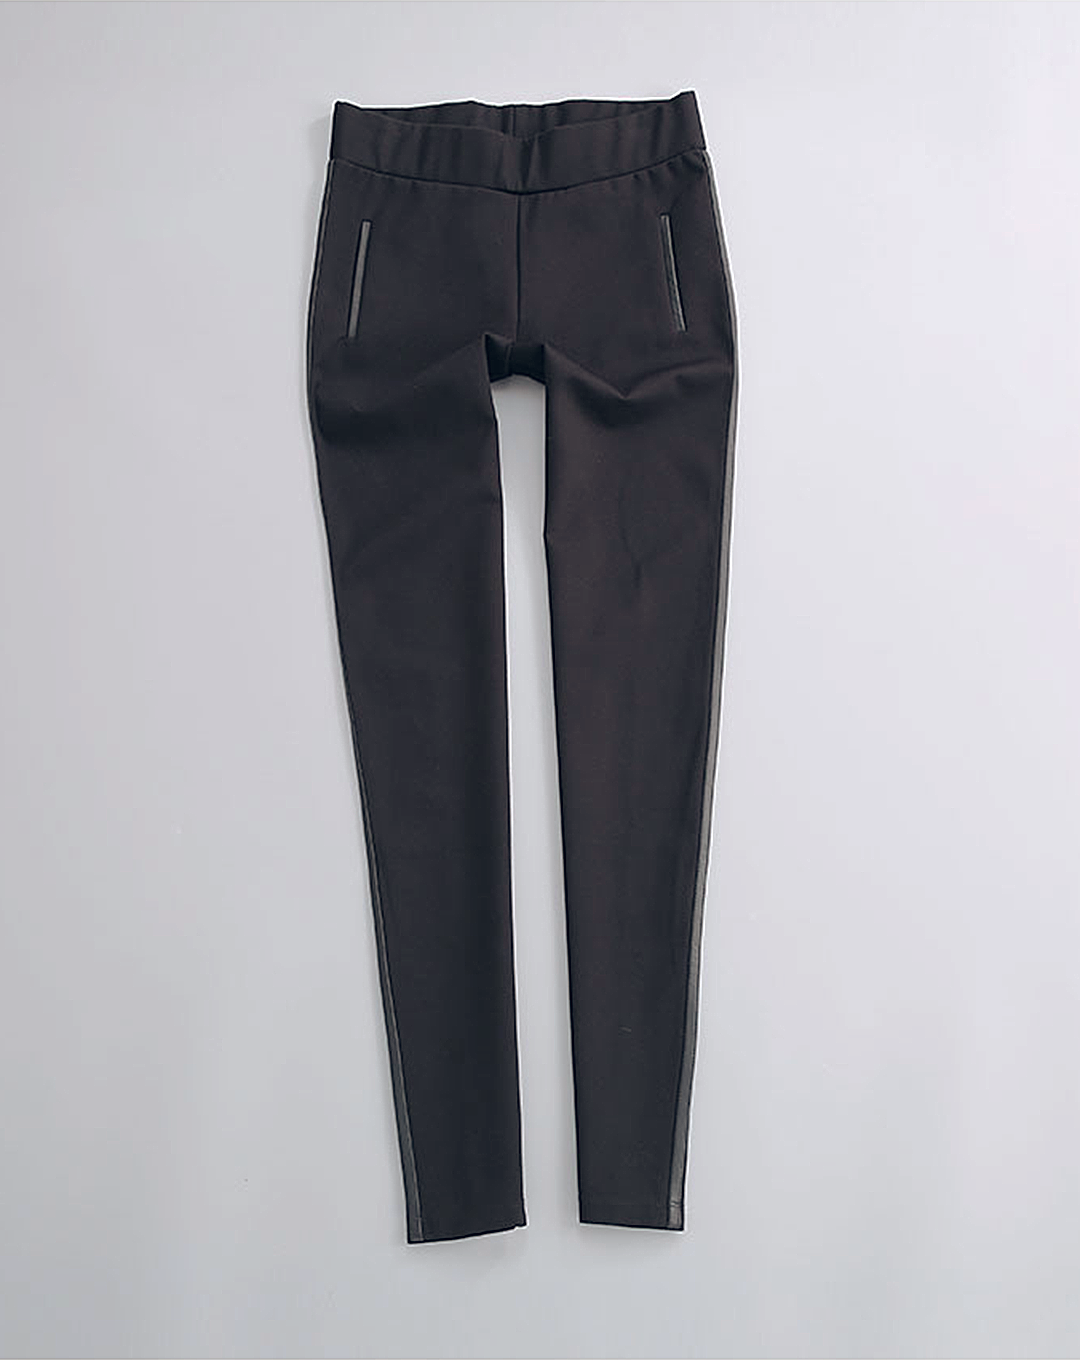 ♀Leather Line Stretch Pants